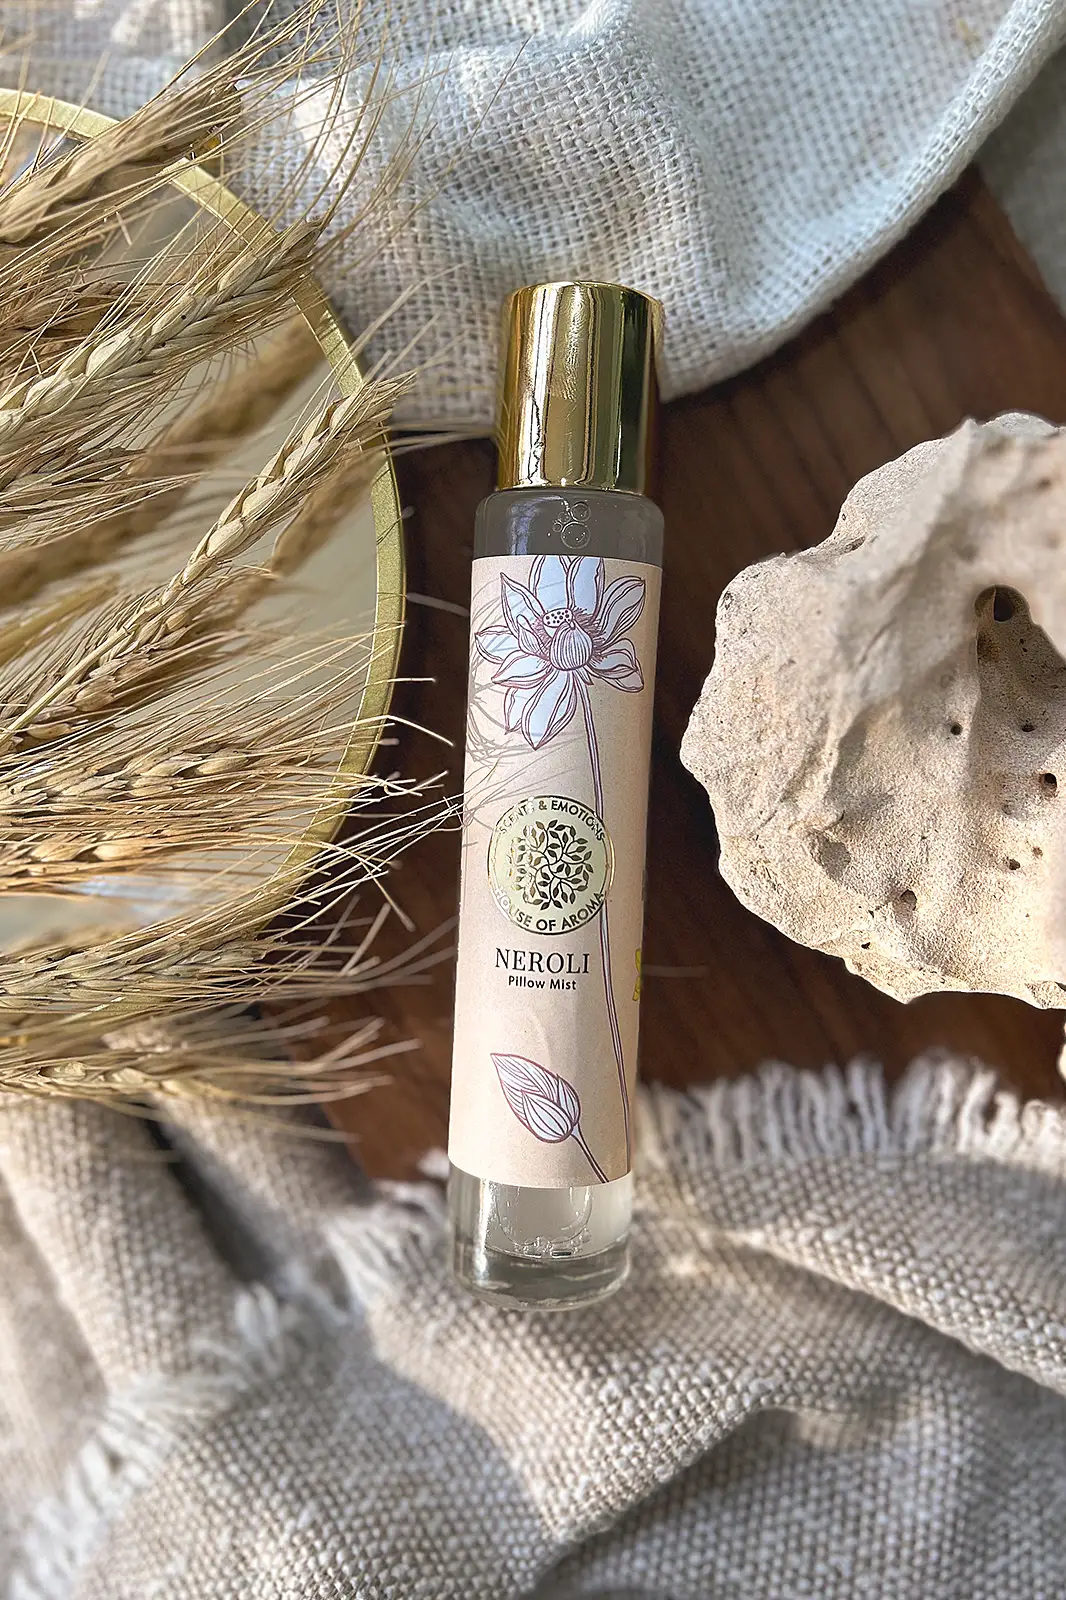 Natural Neroli Pillow Mist Sleep spray, fast sleeping spray, fast sleep spray, sleep spray for adults, instant sleep spray, deep sleep spray buy online, aromatic products, fragrance, pillow mist spray online, fragrance for home